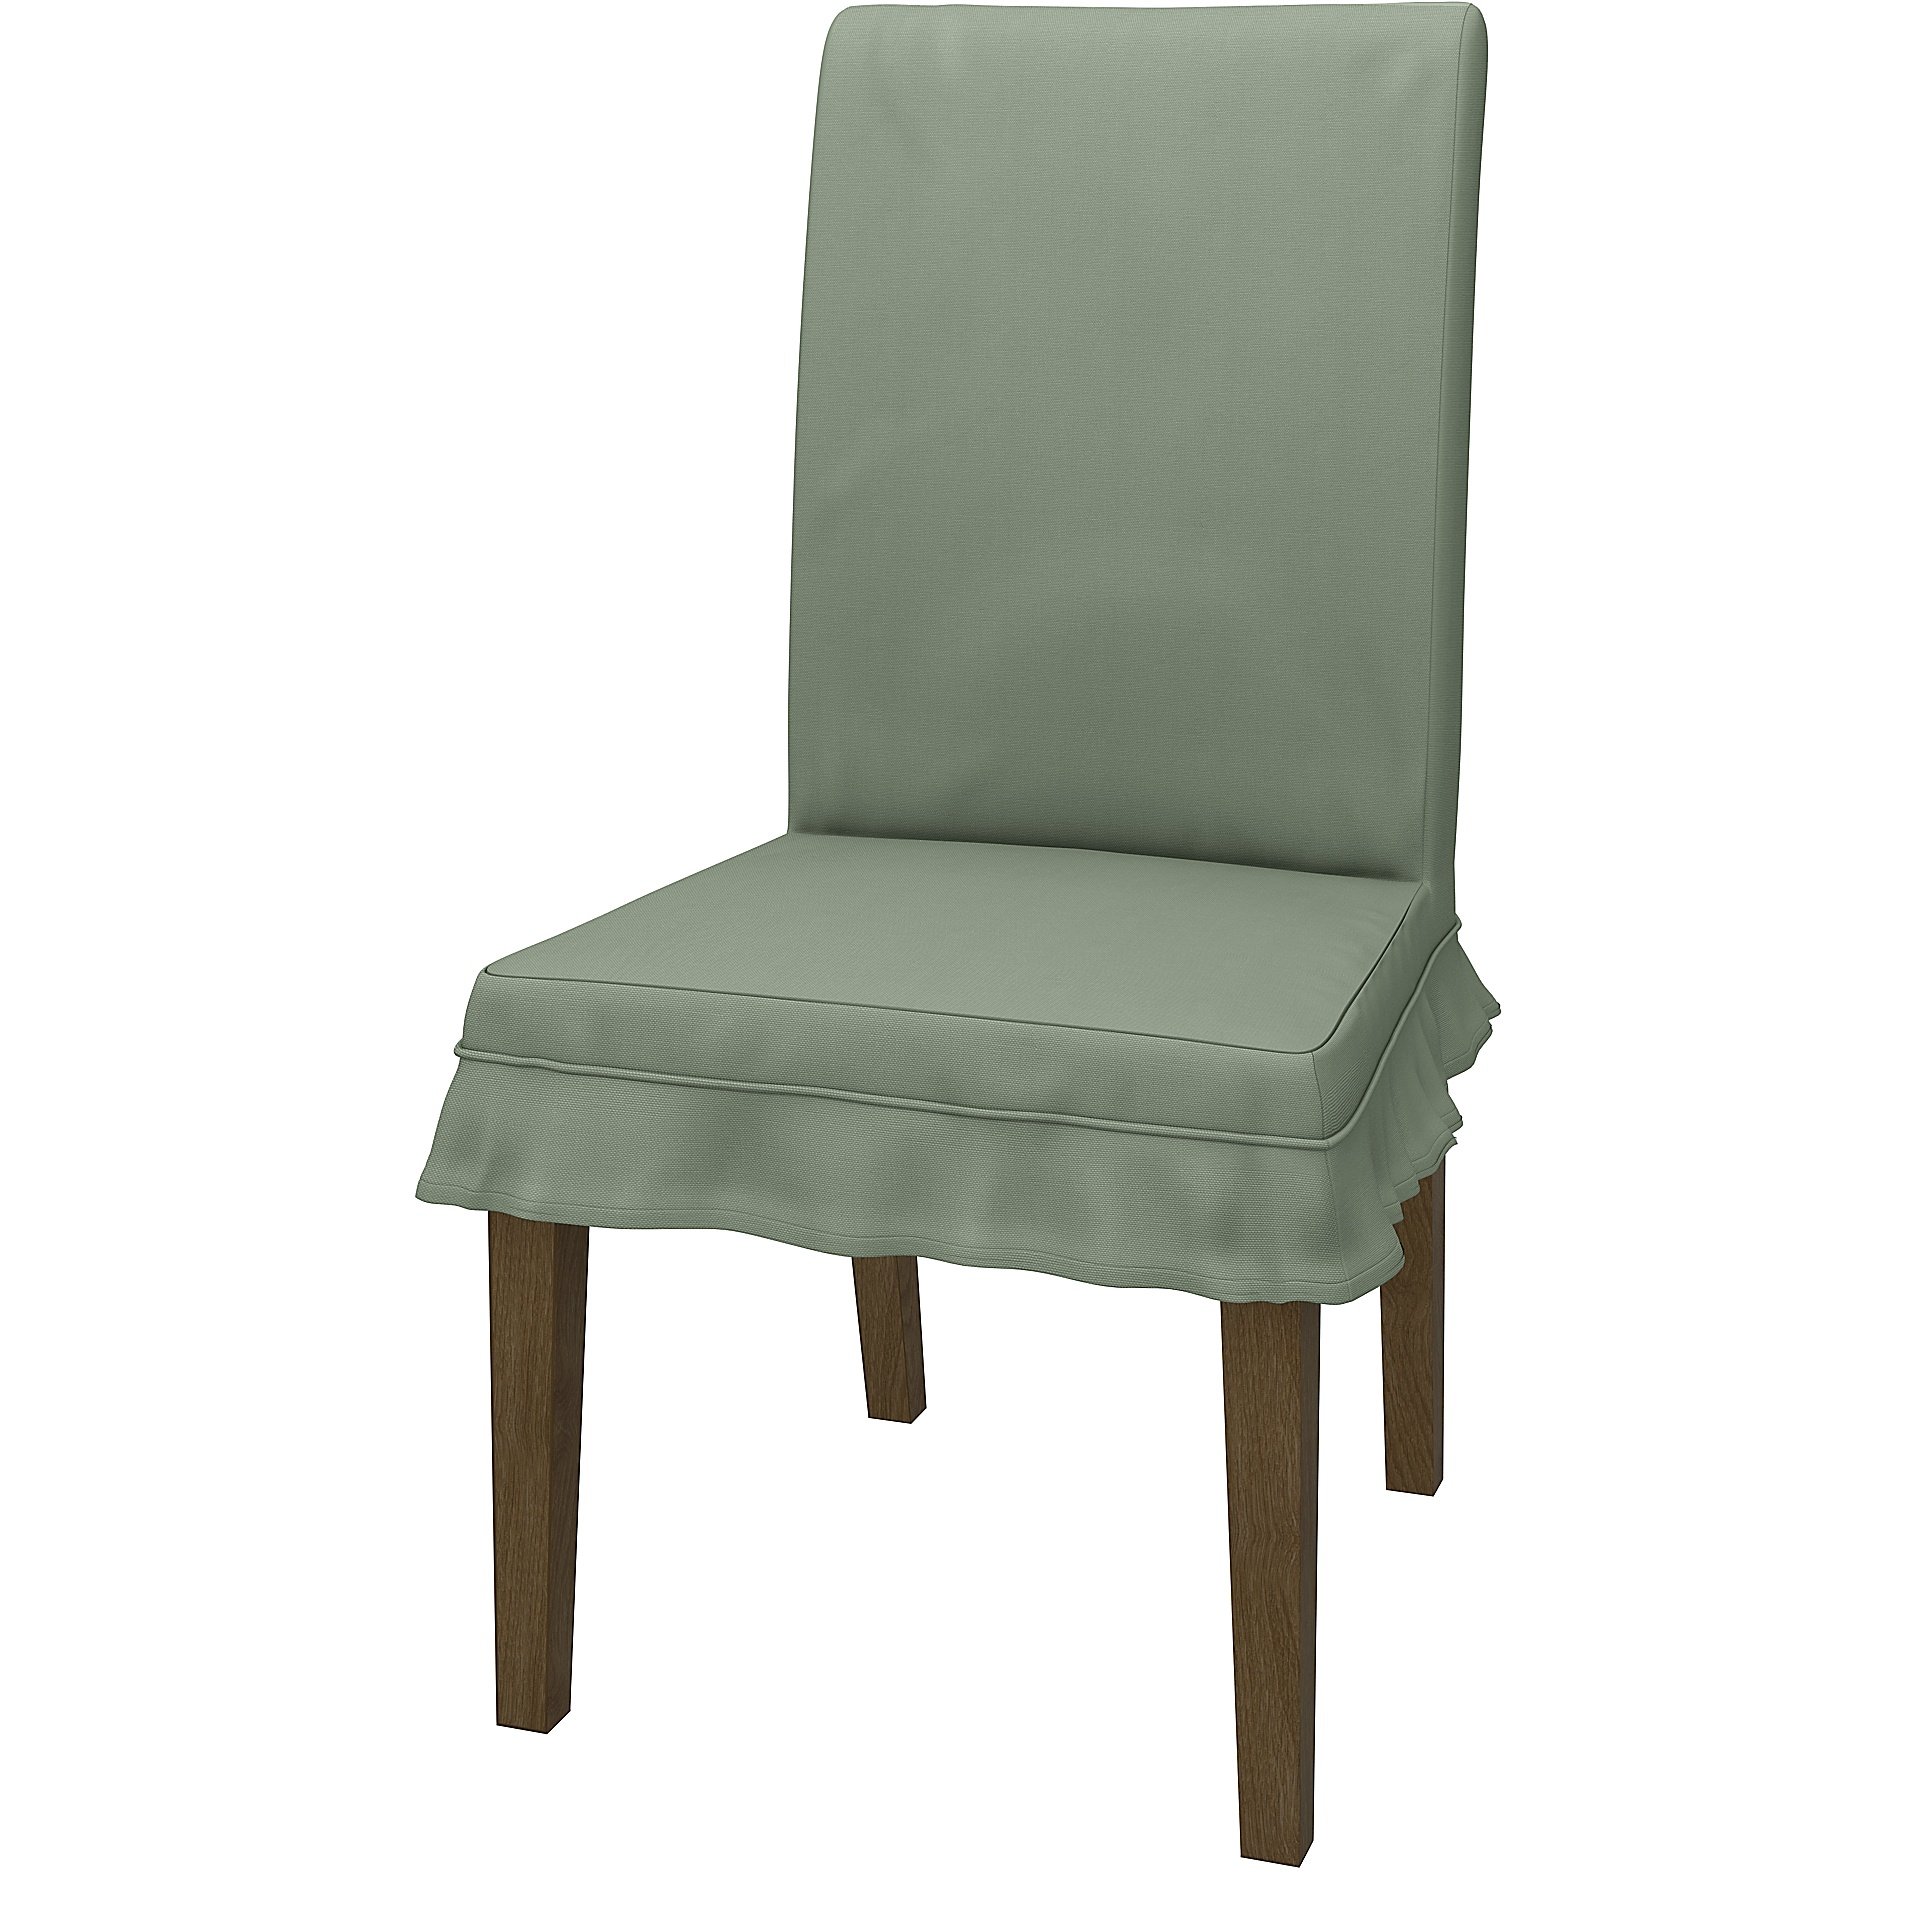 IKEA - HENRIKSDAL DINING CHAIR COVER SHORT SKIRT WITH RUFFLES (STANDARD MODEL), Seagrass, Cotton - B